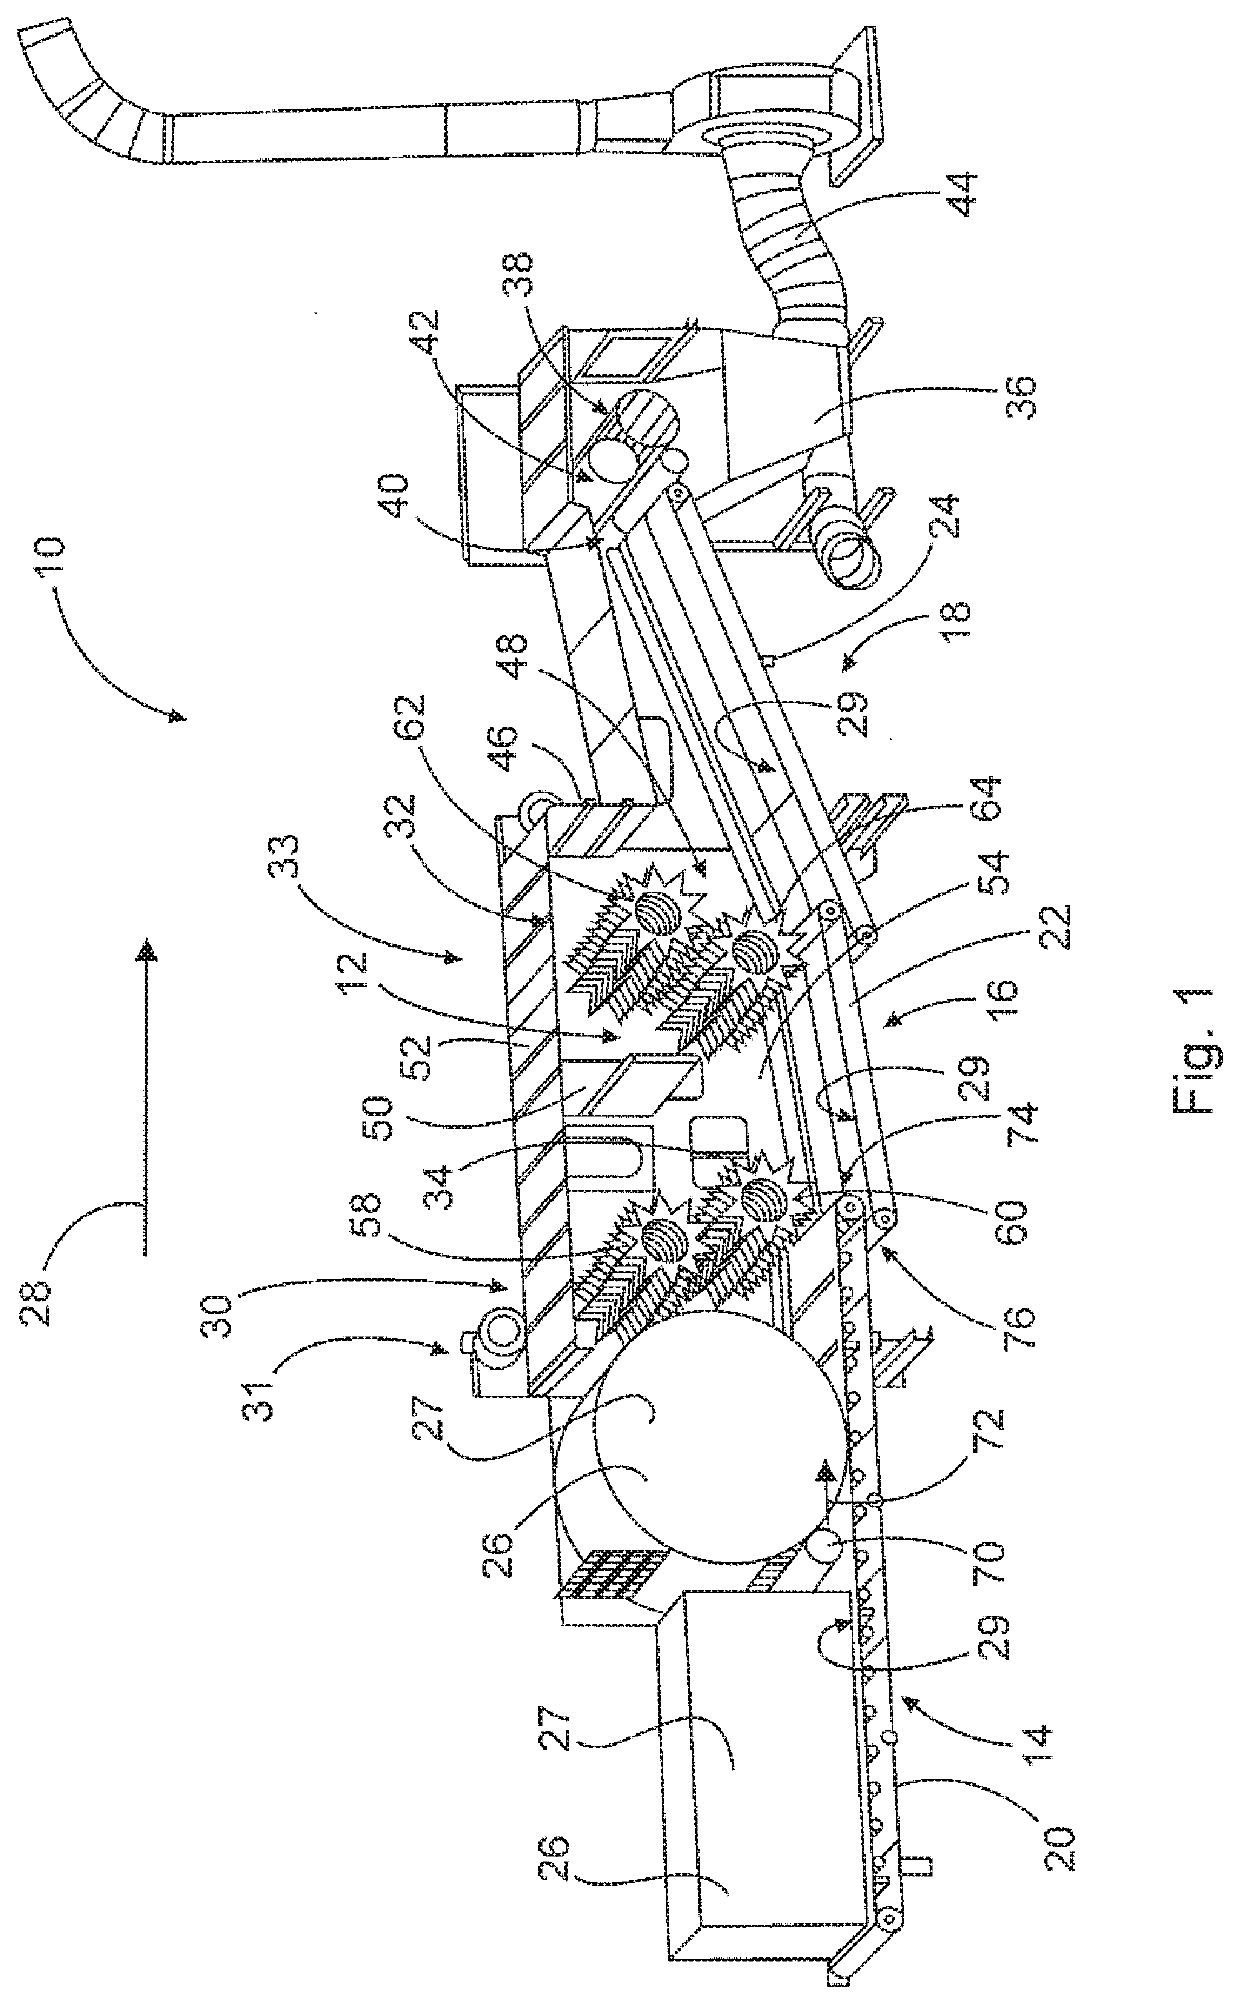 Apparatus for loosening fiber material packed in bales